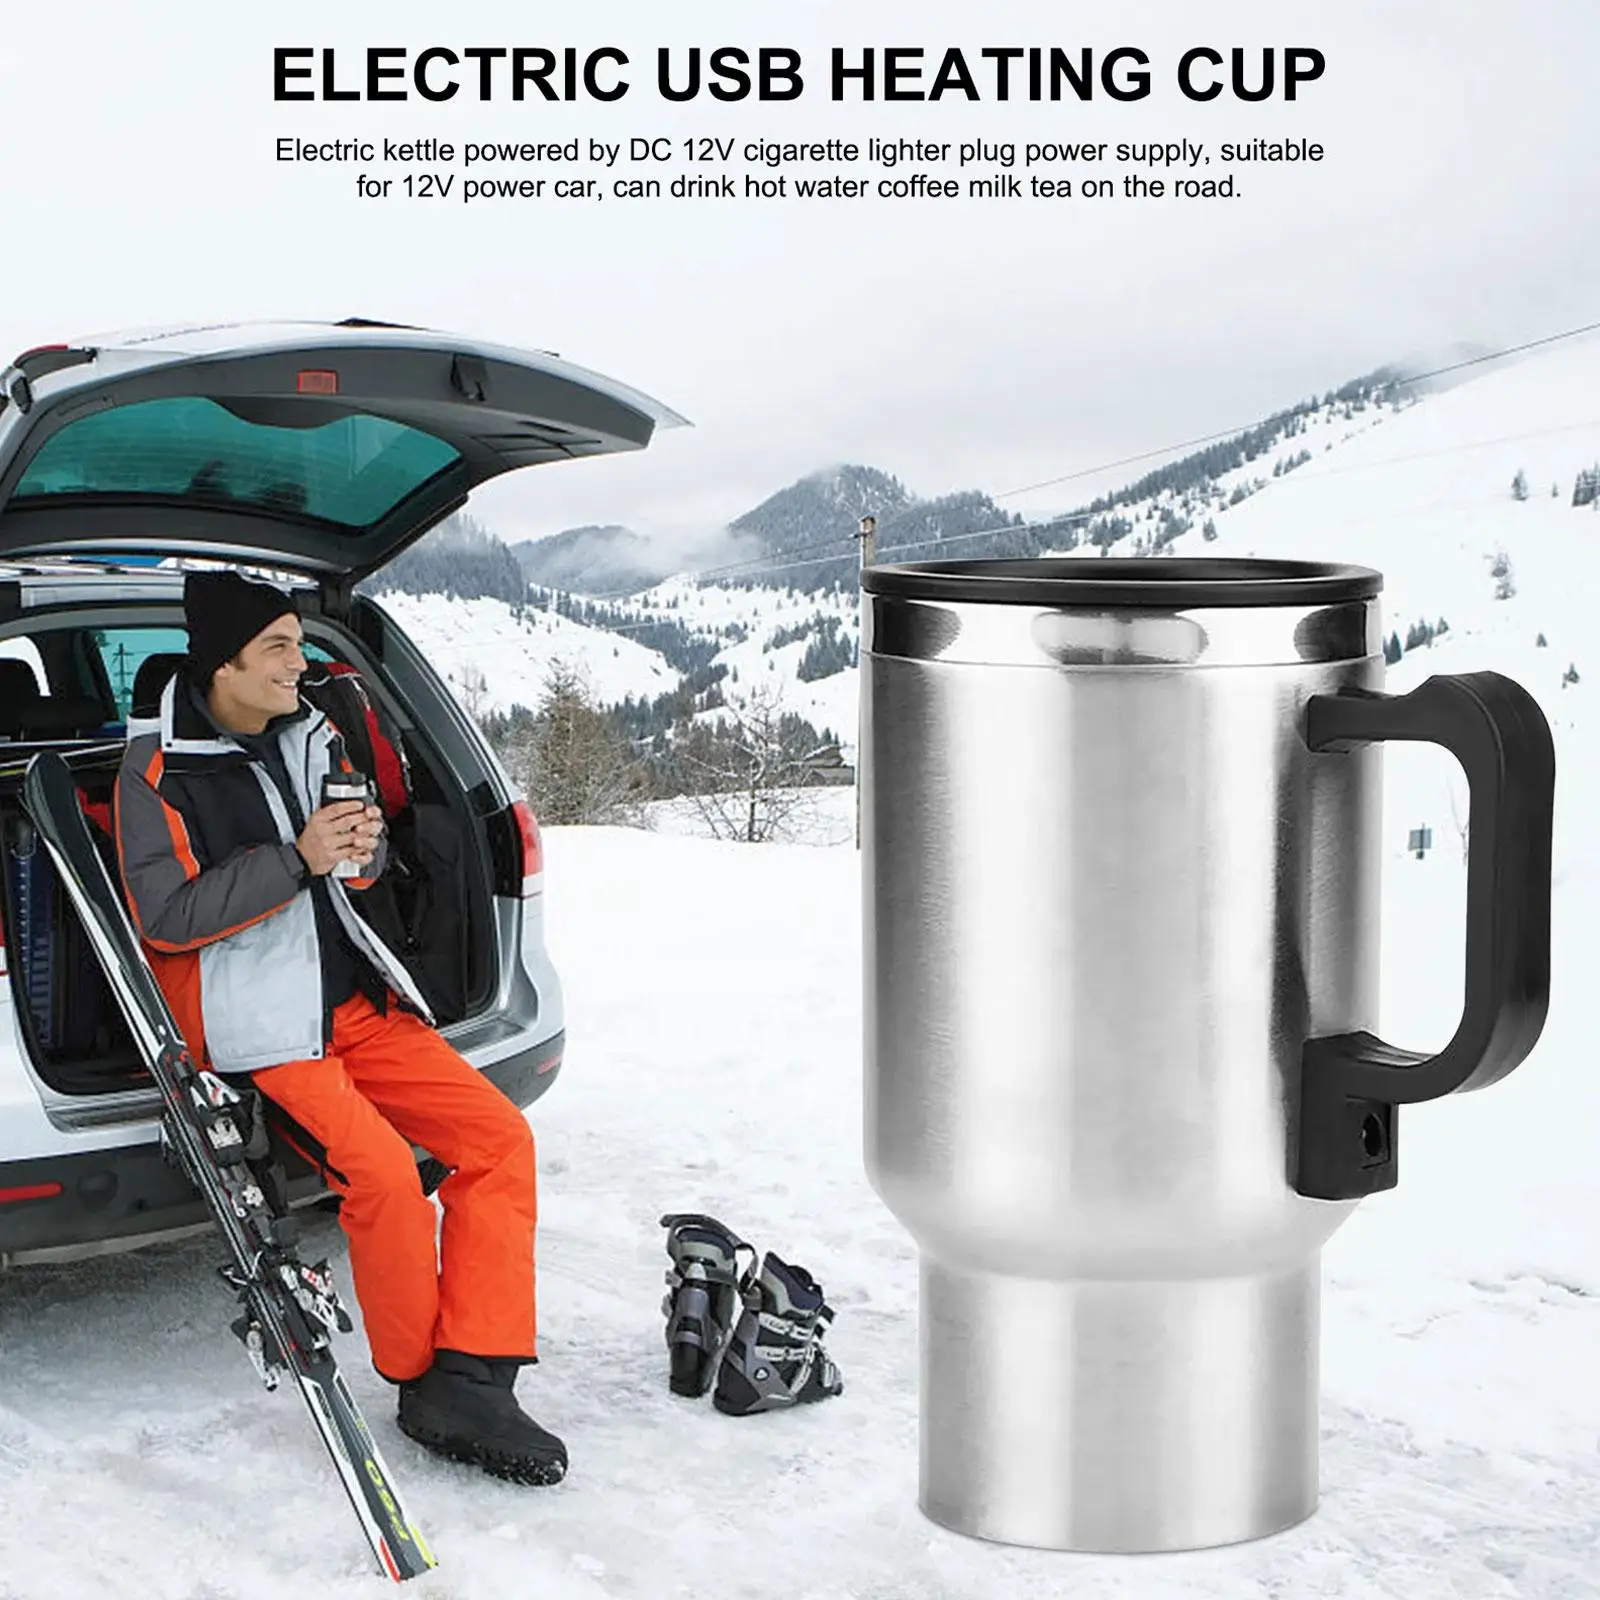 https://ae01.alicdn.com/kf/S507e70b57b1b466caeee97a60f976d63n/12V-450ml-Stainless-Steel-Vehicle-Heating-Cup-Electric-Heating-Car-Kettle-Camping-Travel-Kettle-Water-Coffee.jpg